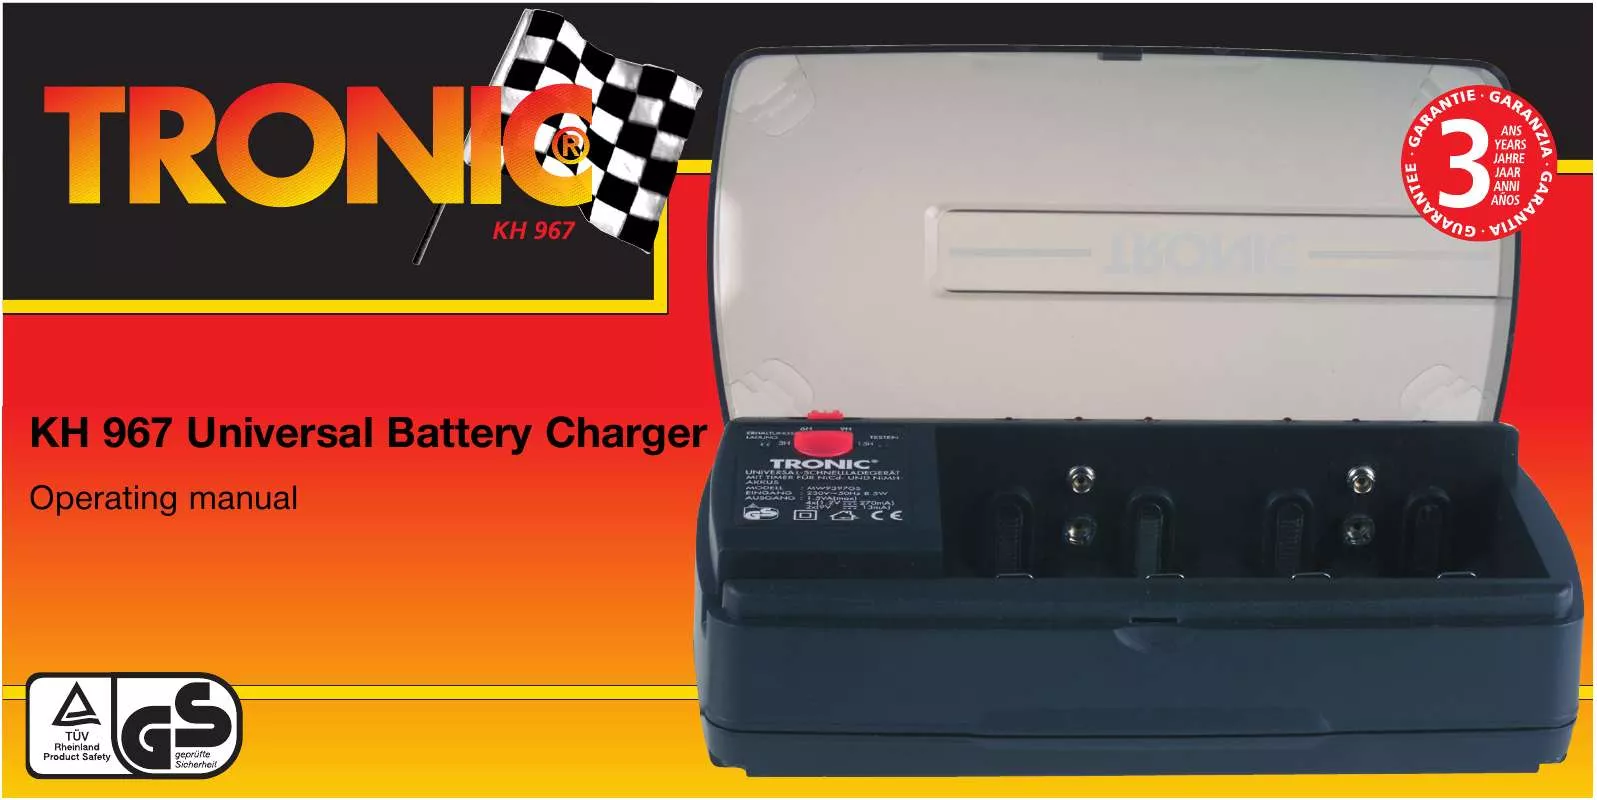 Mode d'emploi KOMPERNASS TRONIC KH 967 UNIVERSAL BATTERY CHARGER WITH TIMER FUNCTION